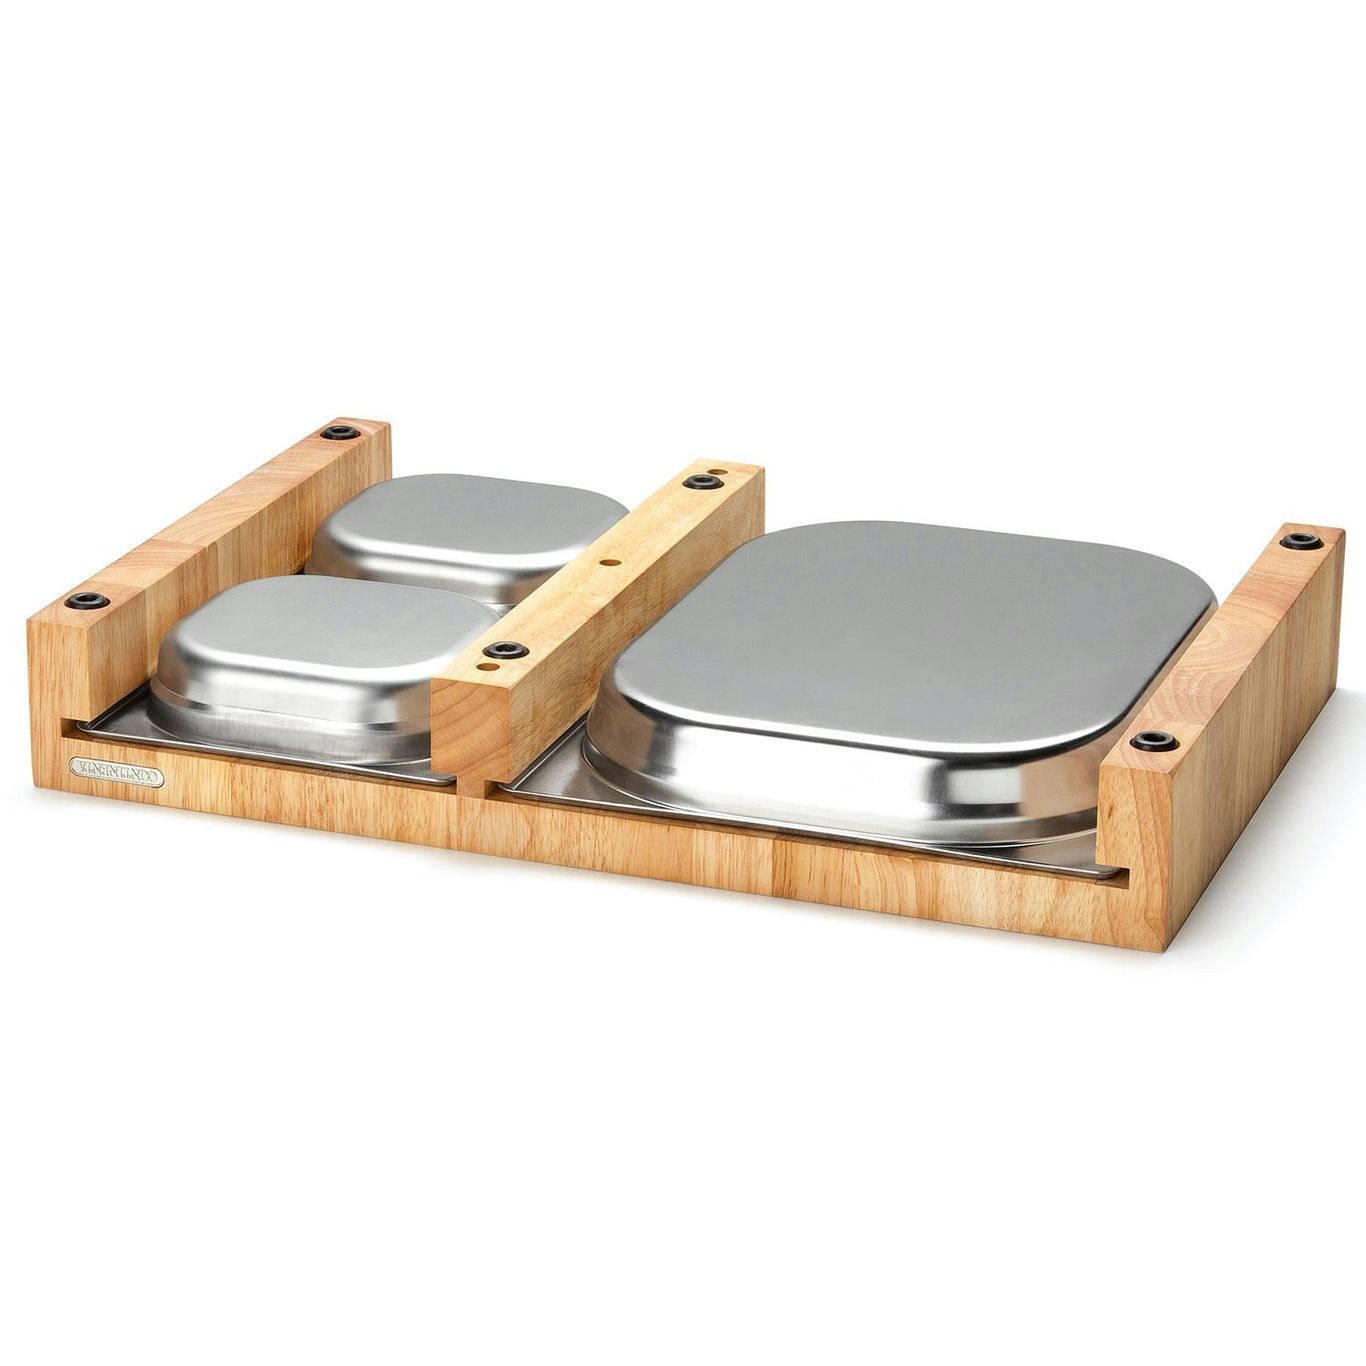 https://royaldesign.com/image/2/continenta-cutting-board-rubber-wood-w-3-boxes-52x325x85-1?w=800&quality=80